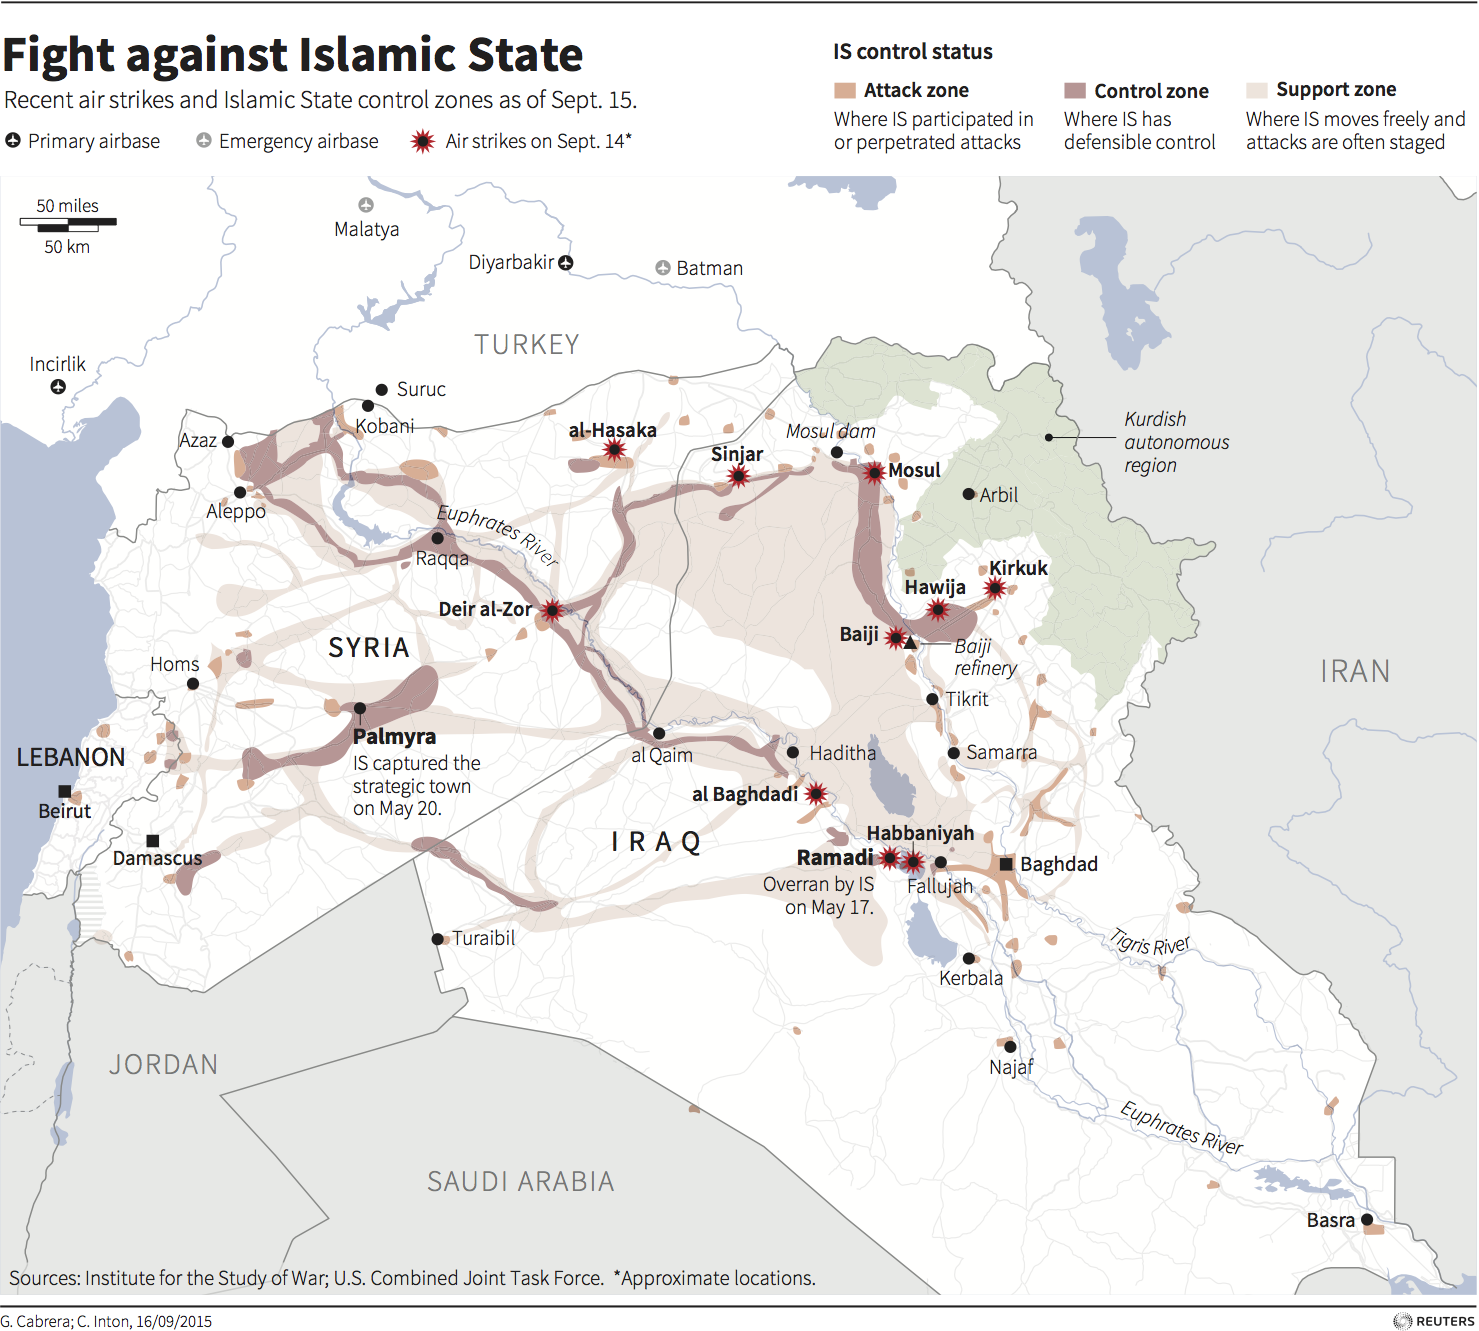 isis map